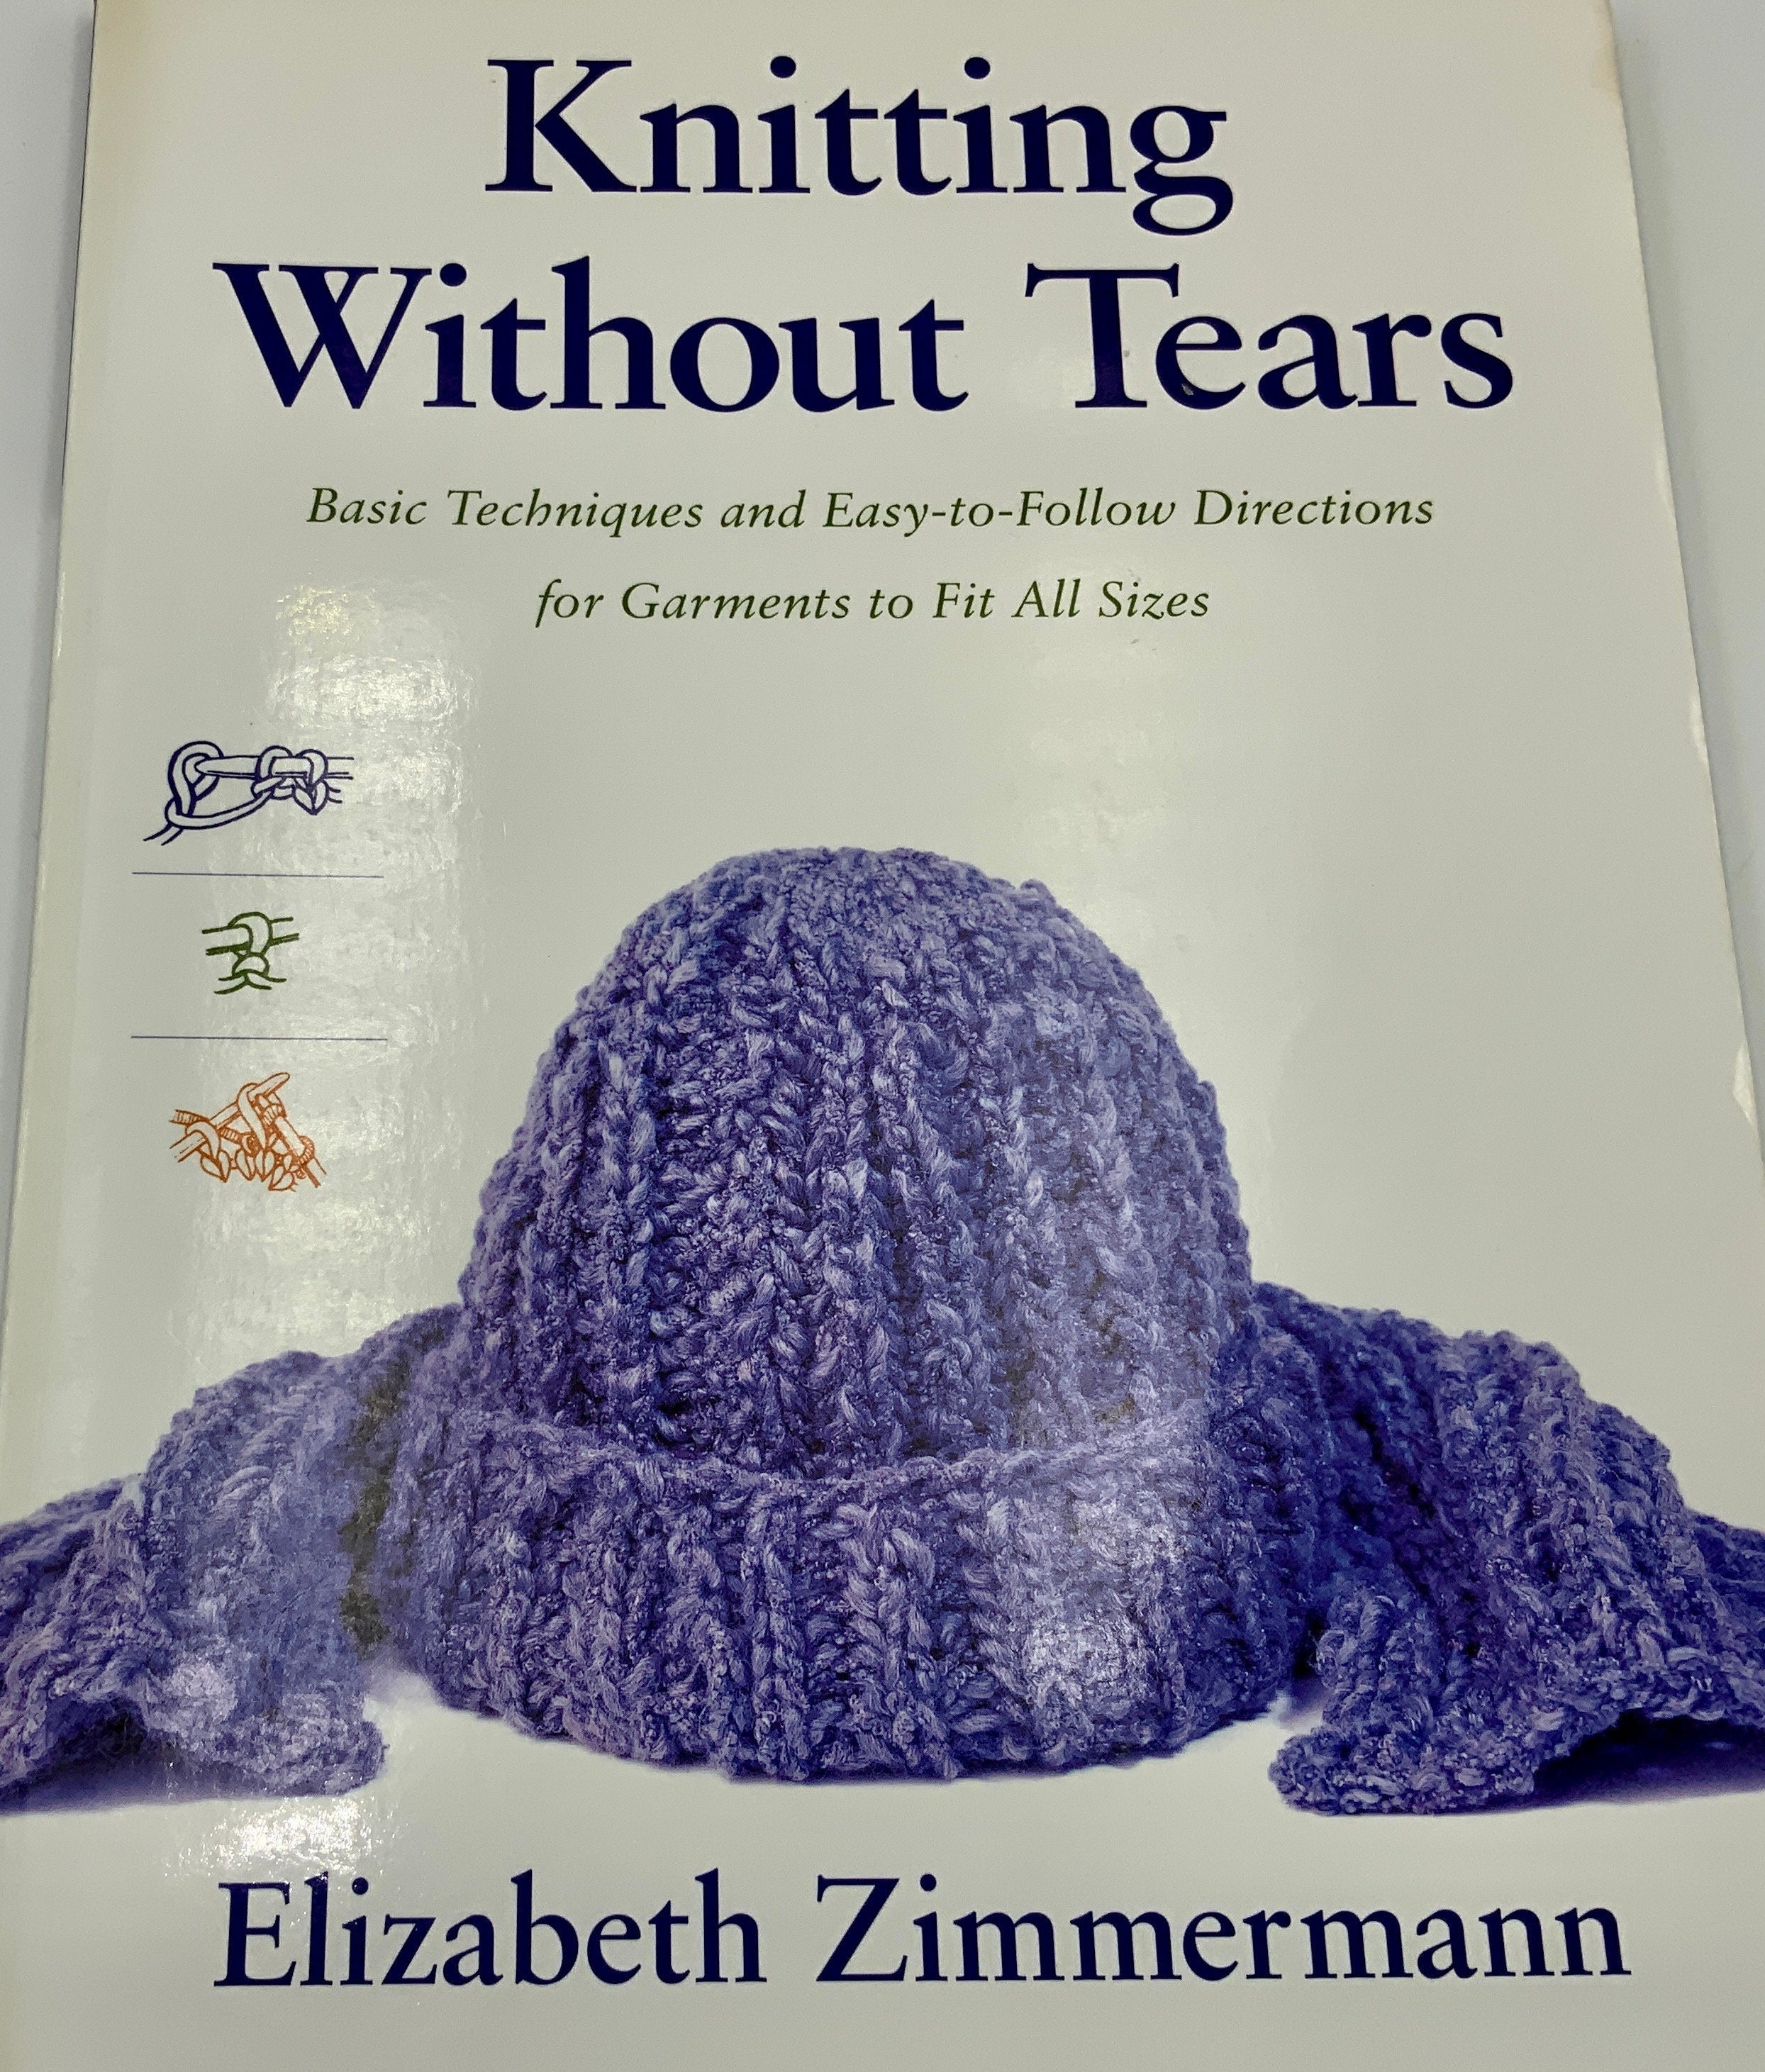 Knitting Books, Knitting Without Tears